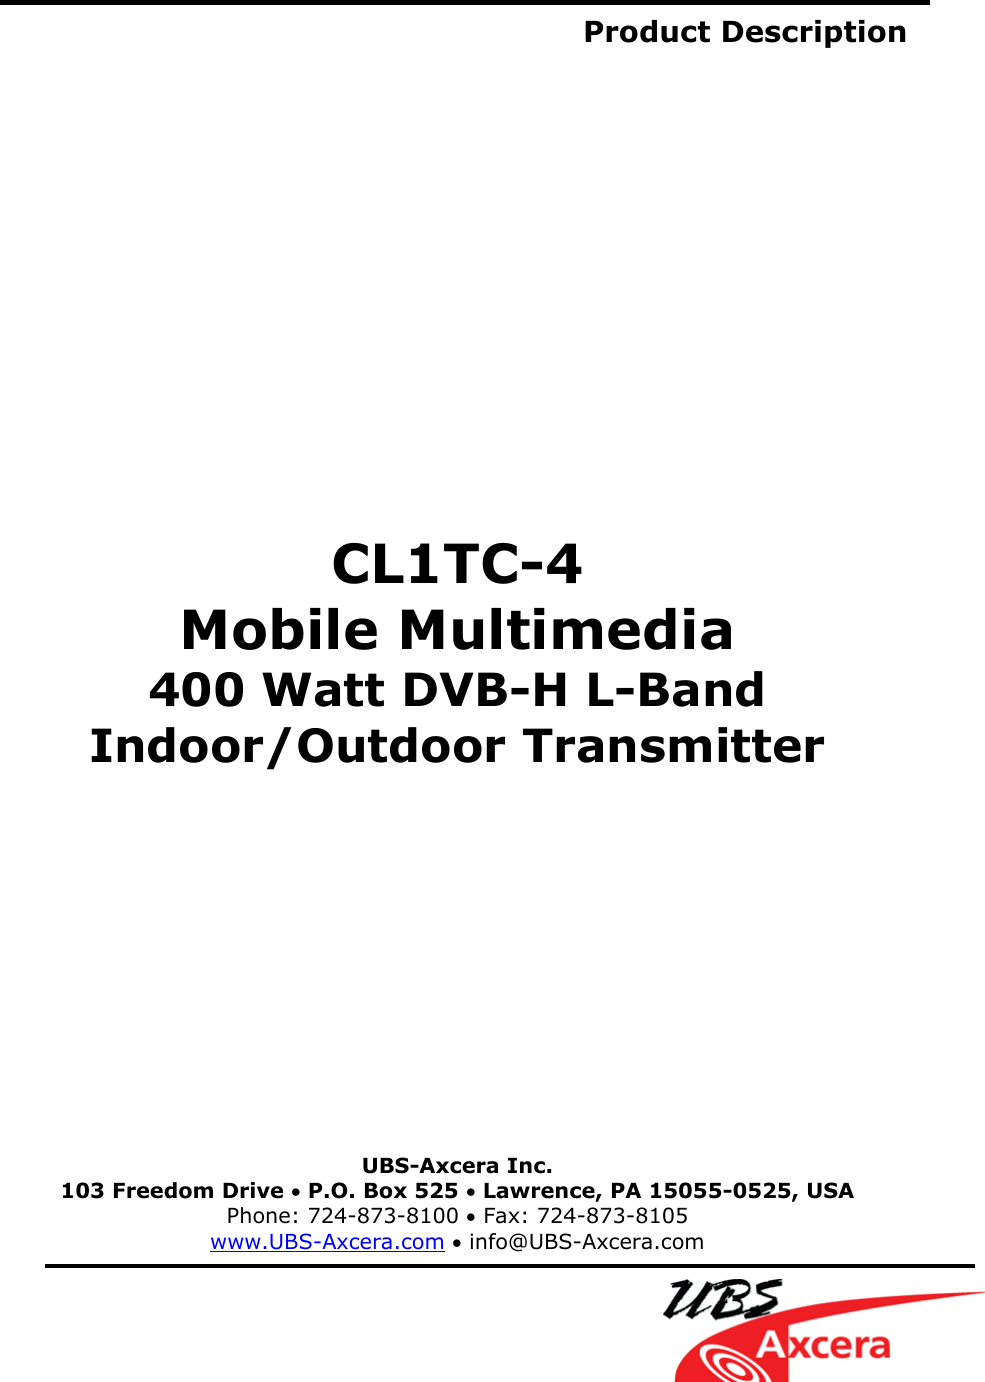  Product Description                    CL1TC-4 Mobile Multimedia 400 Watt DVB-H L-Band Indoor/Outdoor Transmitter                UBS-Axcera Inc. 103 Freedom Drive • P.O. Box 525 • Lawrence, PA 15055-0525, USA Phone: 724-873-8100 • Fax: 724-873-8105 www.UBS-Axcera.com • info@UBS-Axcera.com    